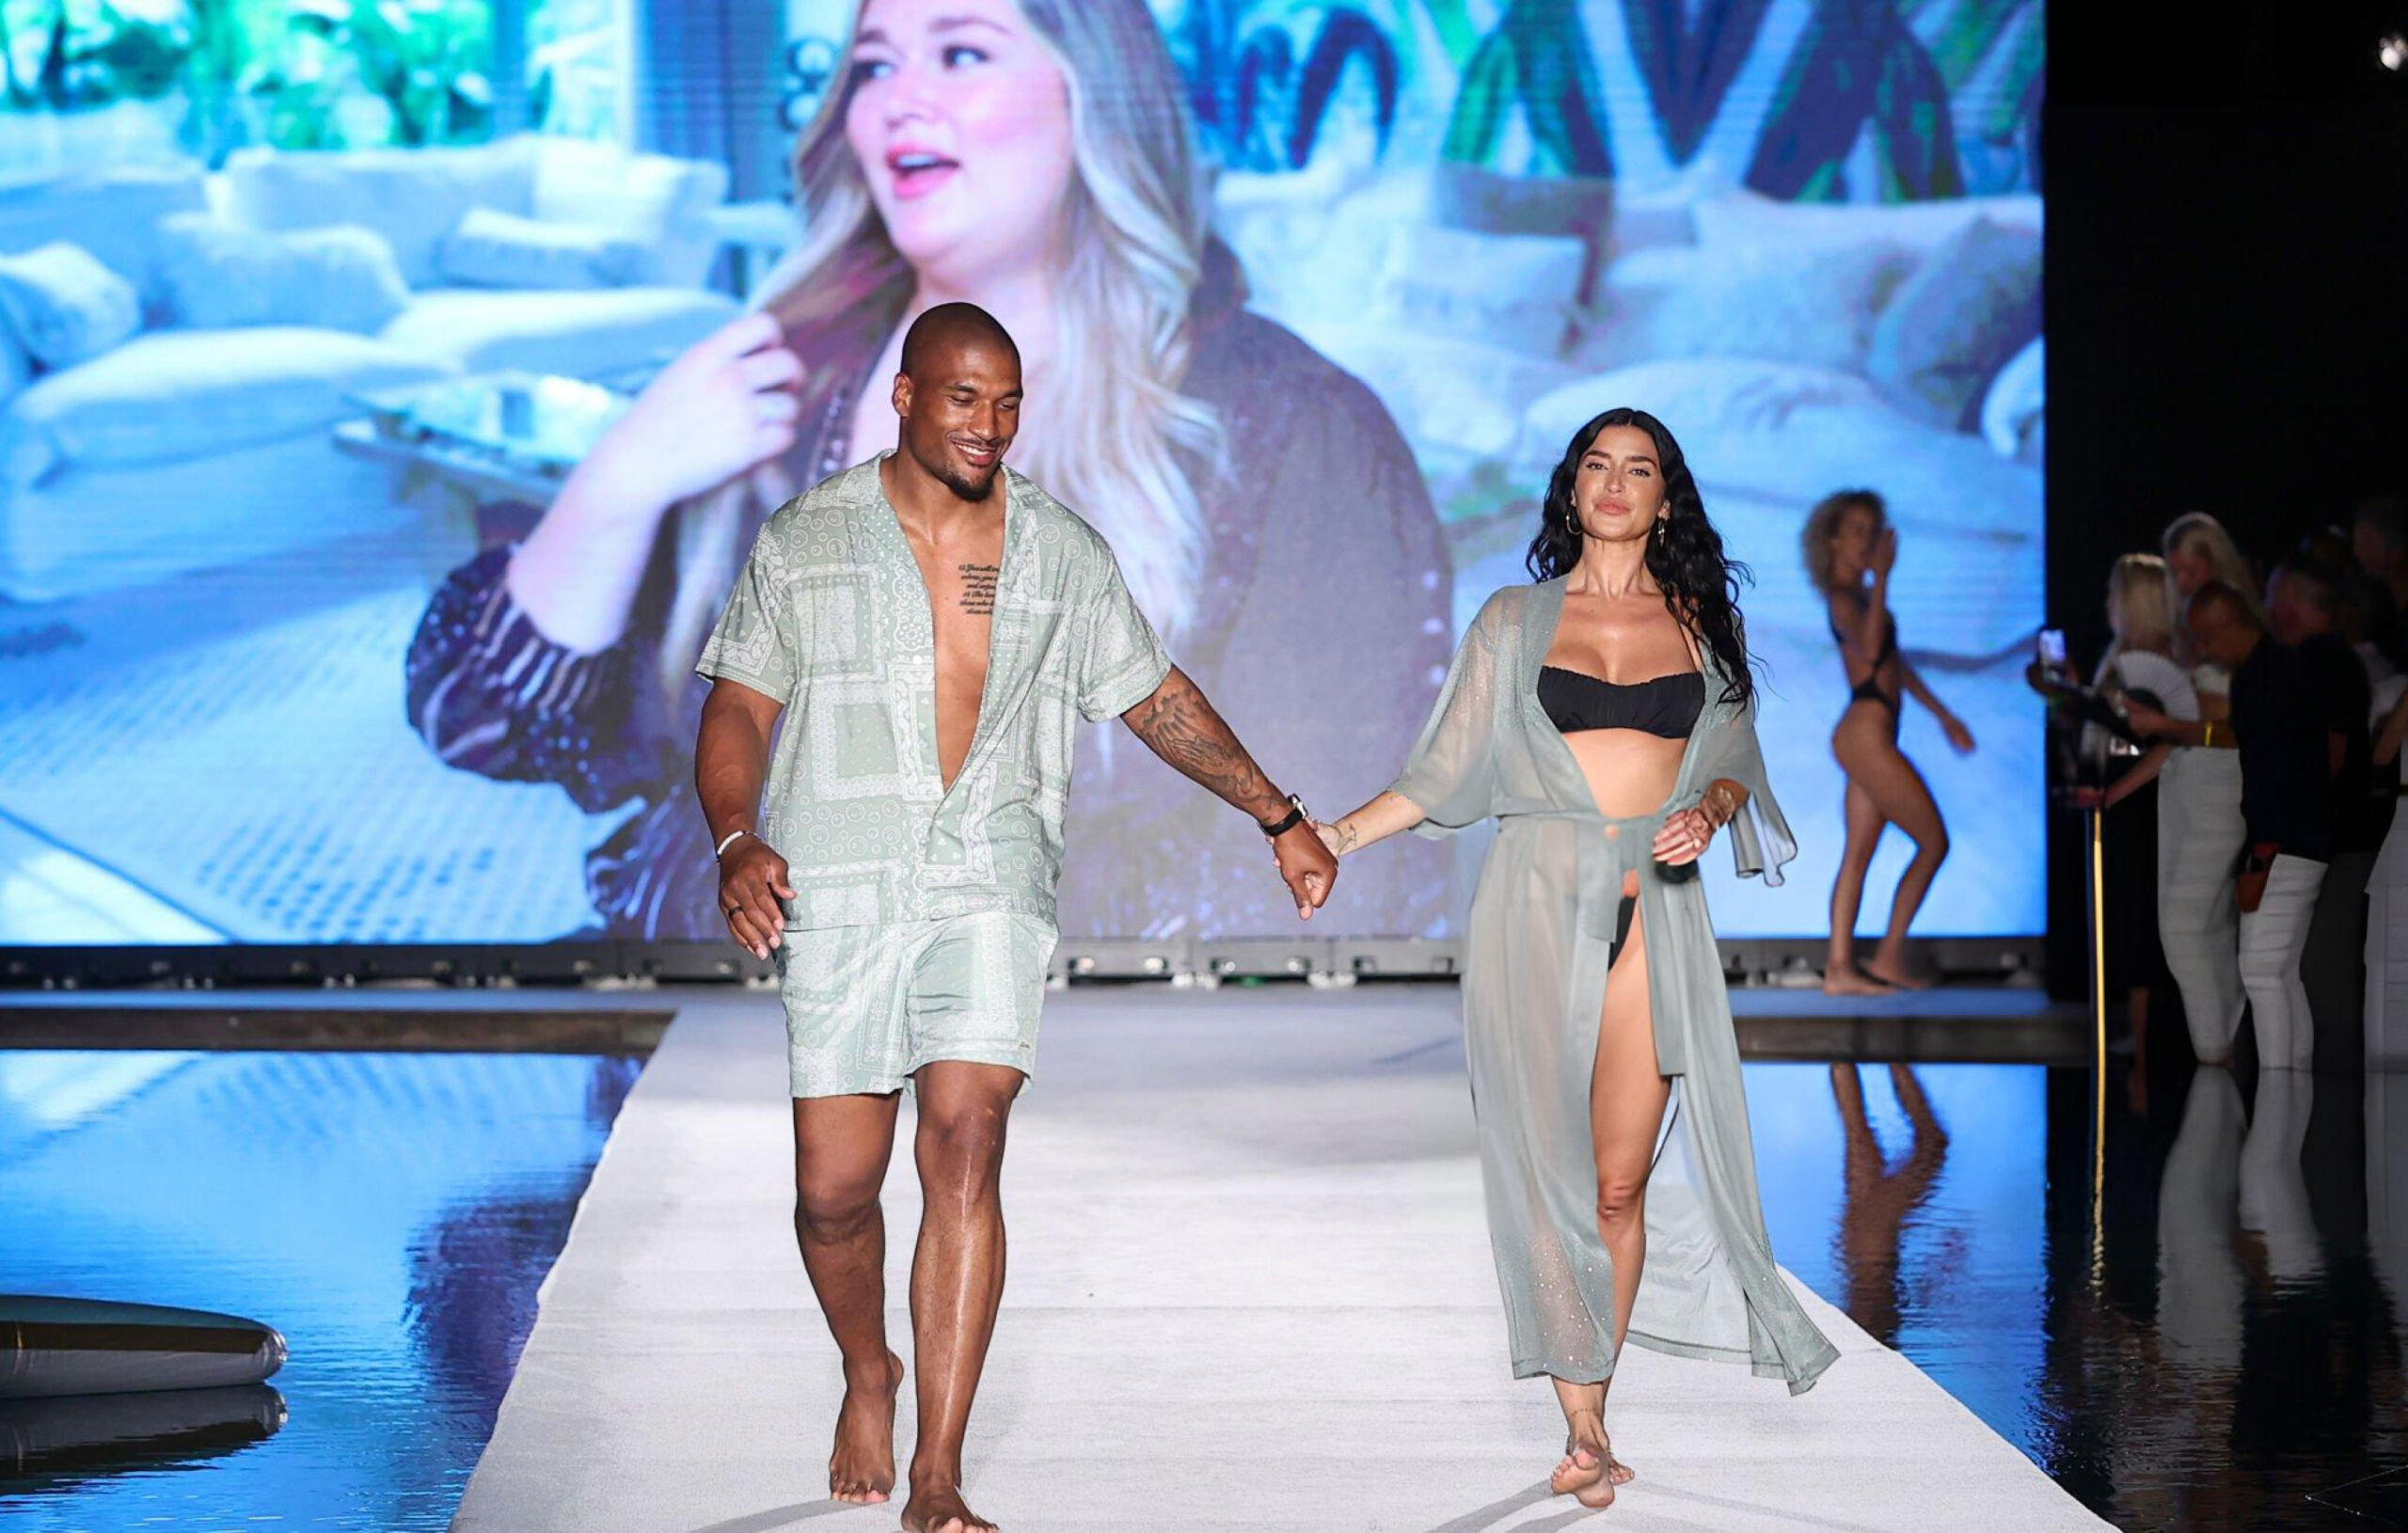 Nicole Williams English walks the runway for Sports Illustrated Swimsuit Runway Show During Paraiso Miami Beach on July 16, 2022 in Miami Beach, Florida.